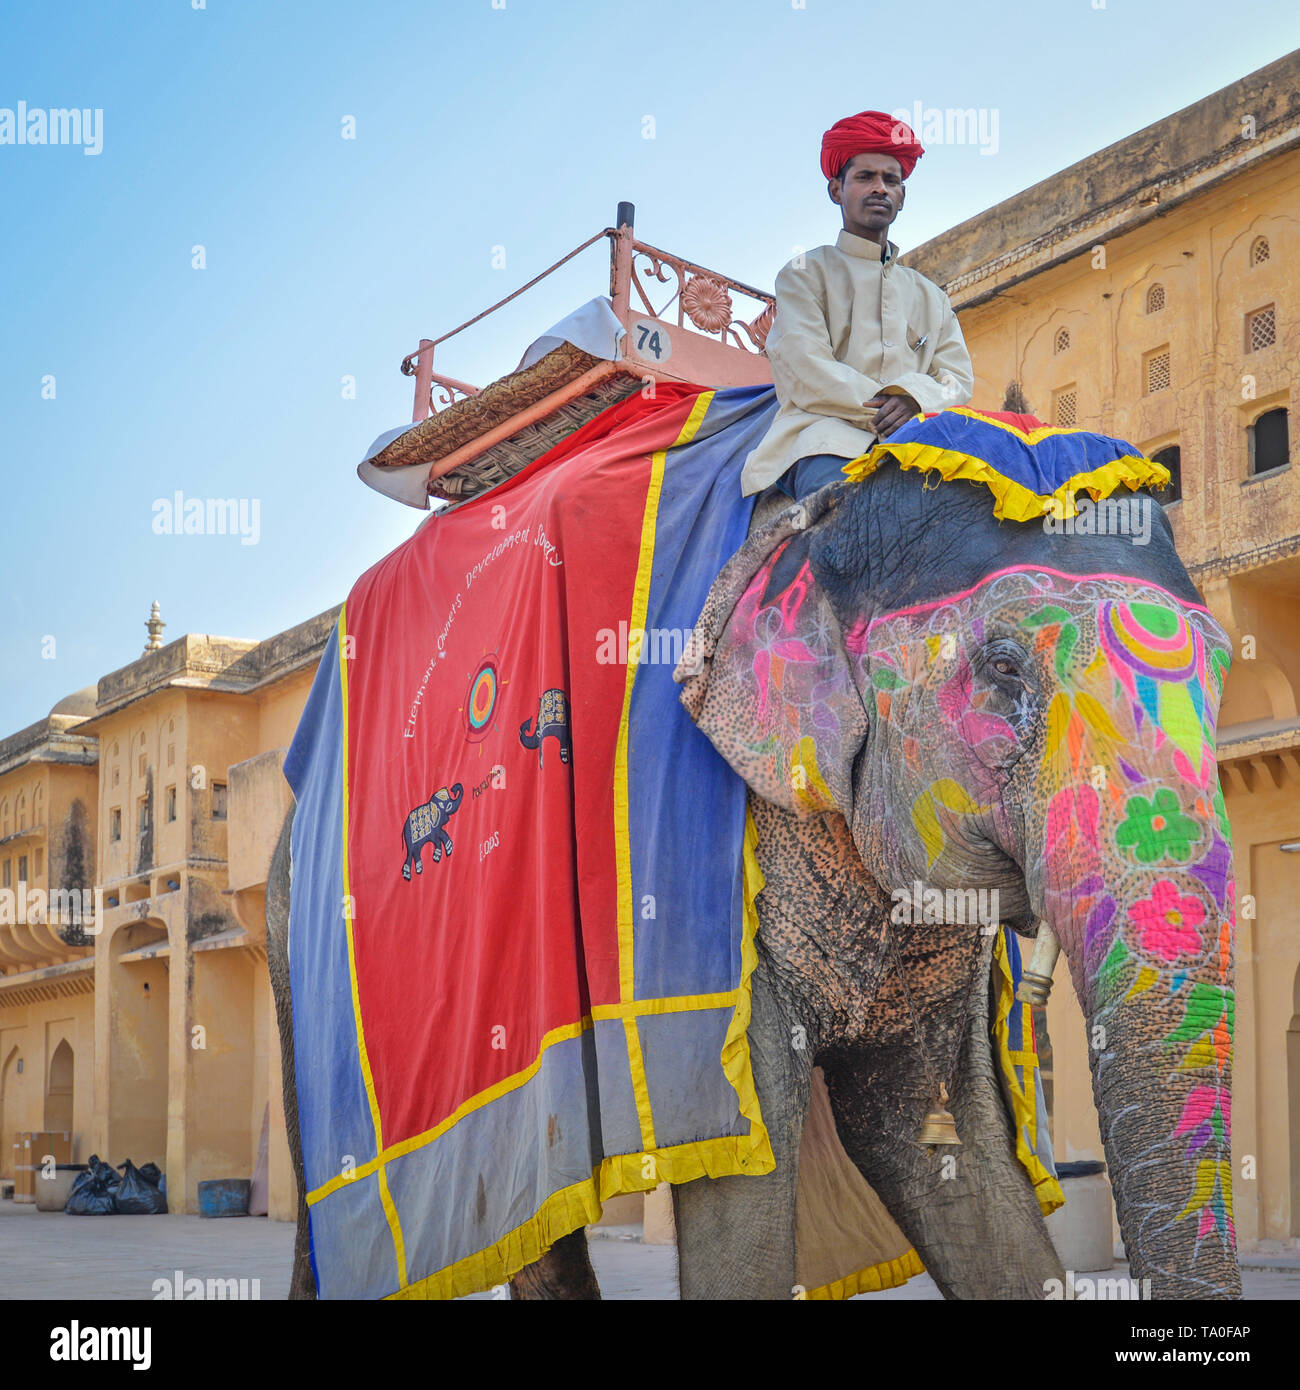 AMBER, INDIA - DECEMBER 5, 2015: Close-up of an elephant keeper and its very elaborately adorned elephant at the Amber Fort Stock Photo